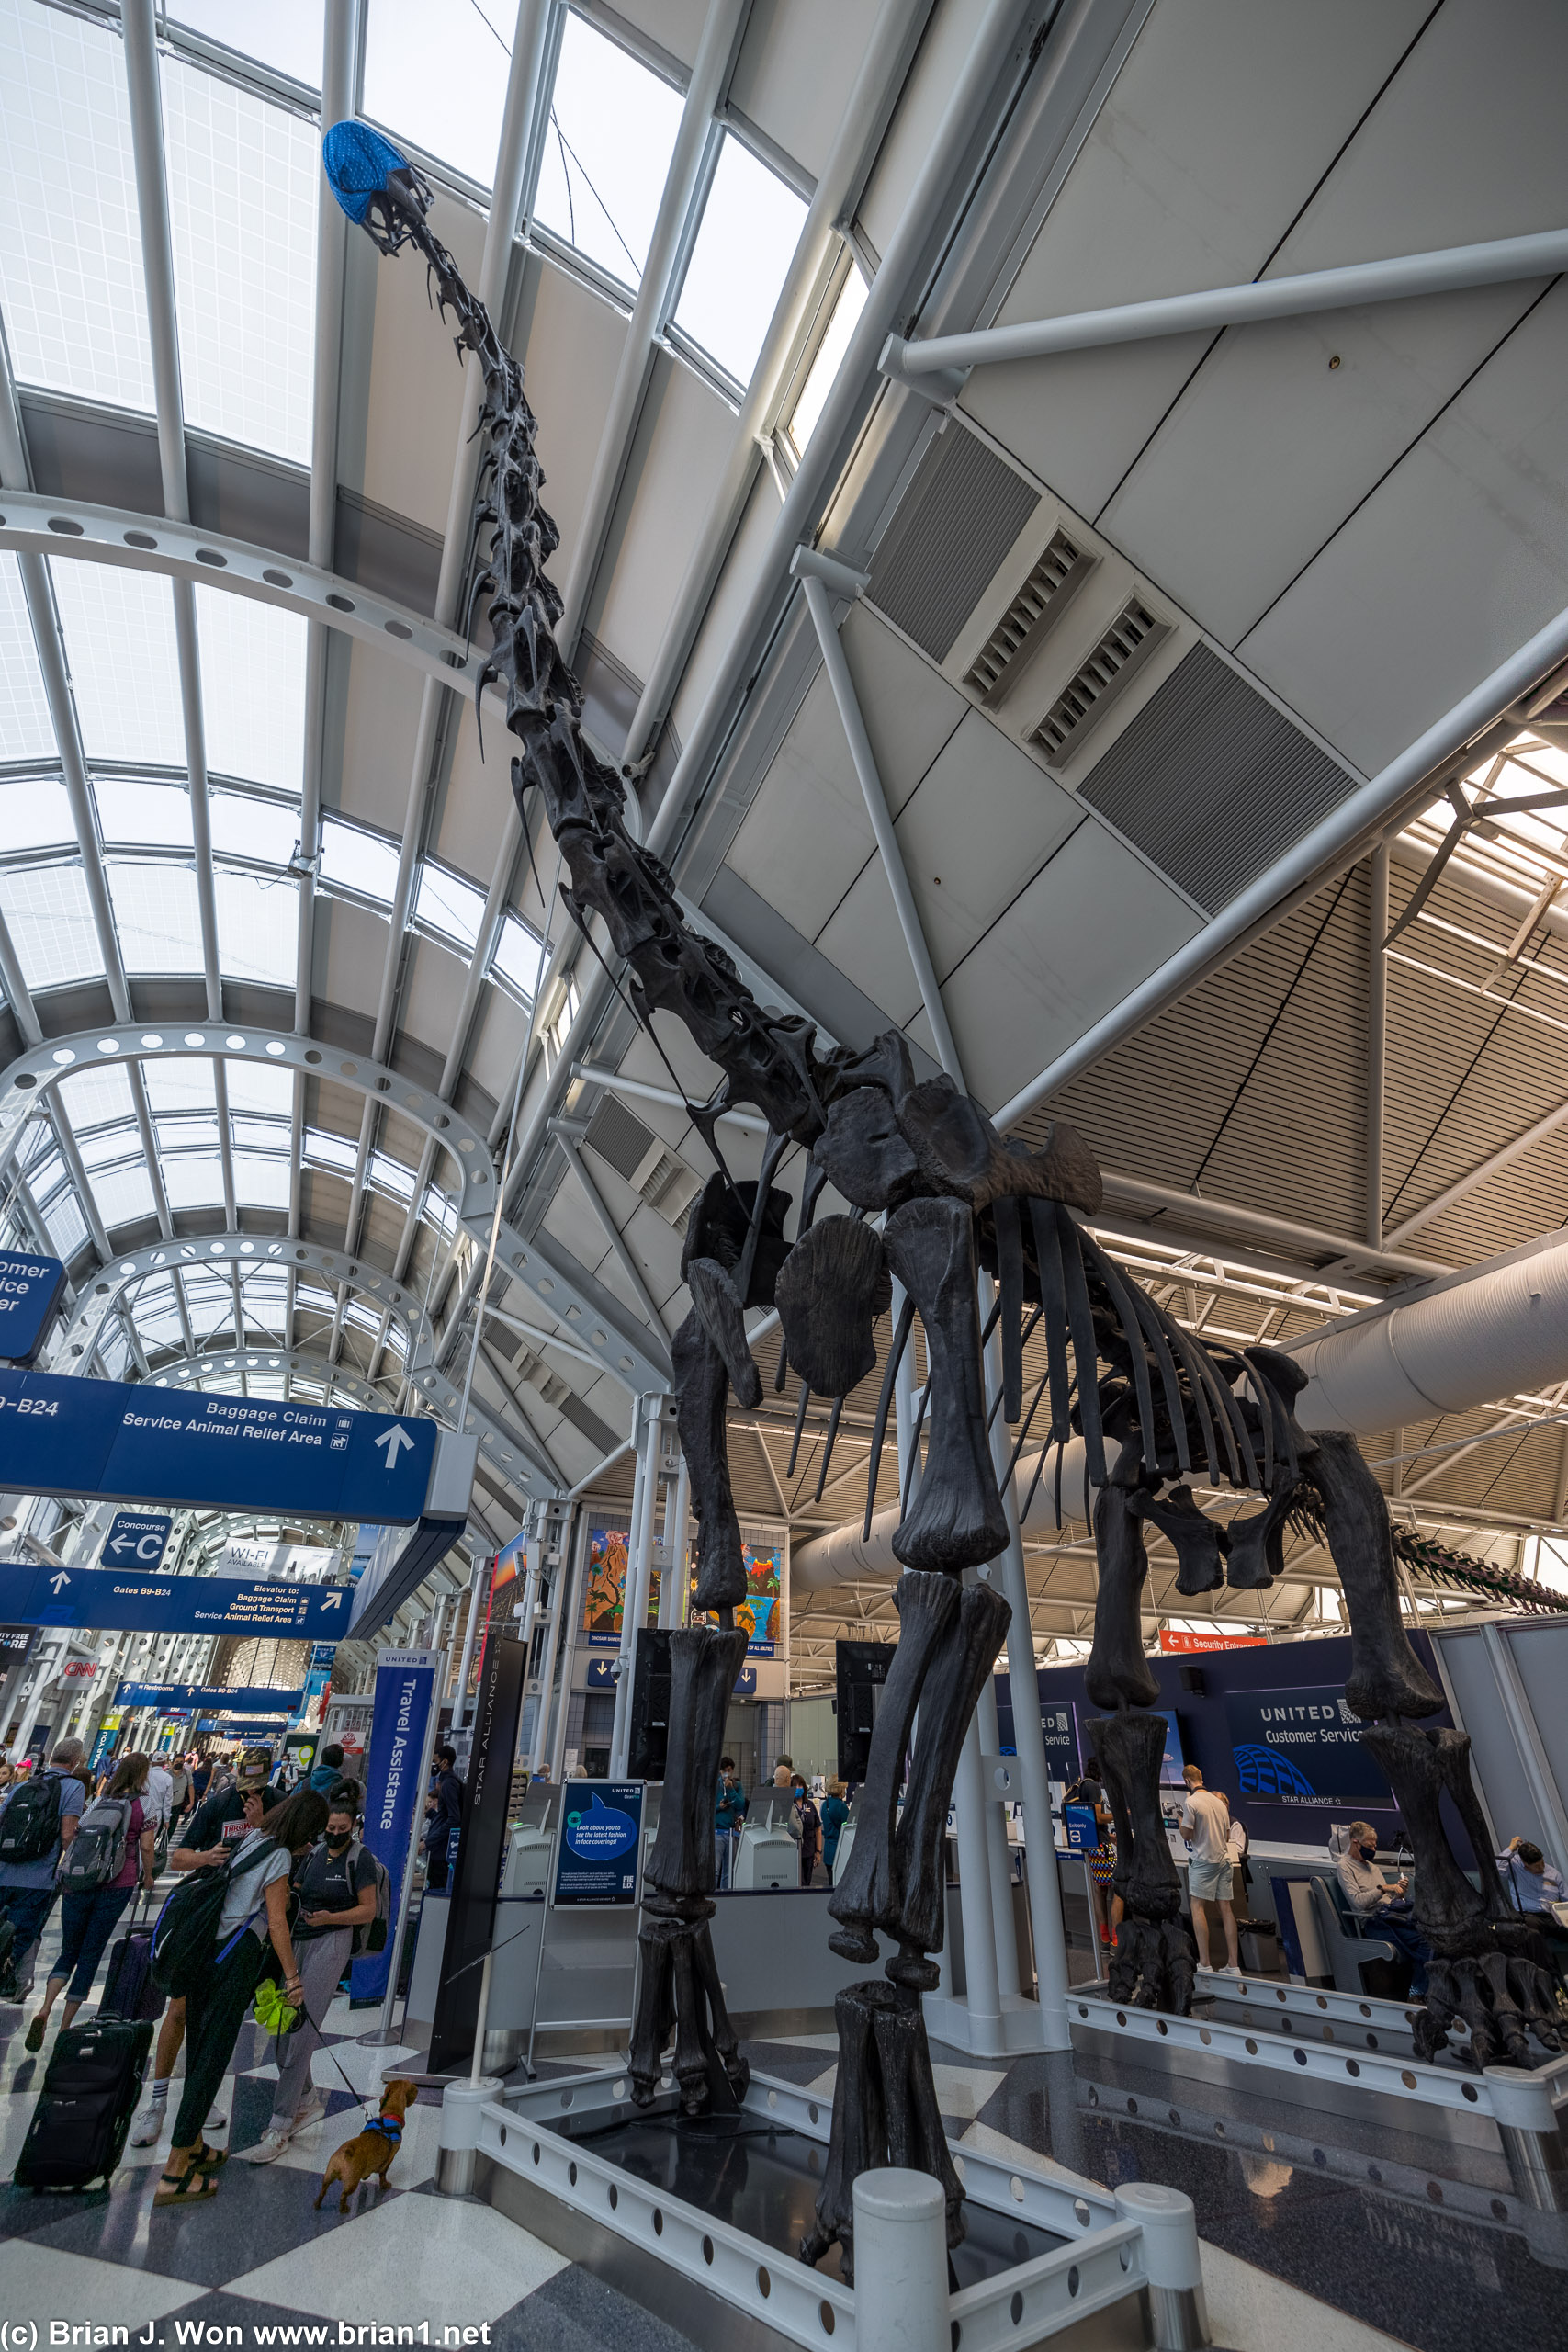 Arrived in Chicago (Terminal 5), then bused over to Terminal 1, then the dinosaur says hello.